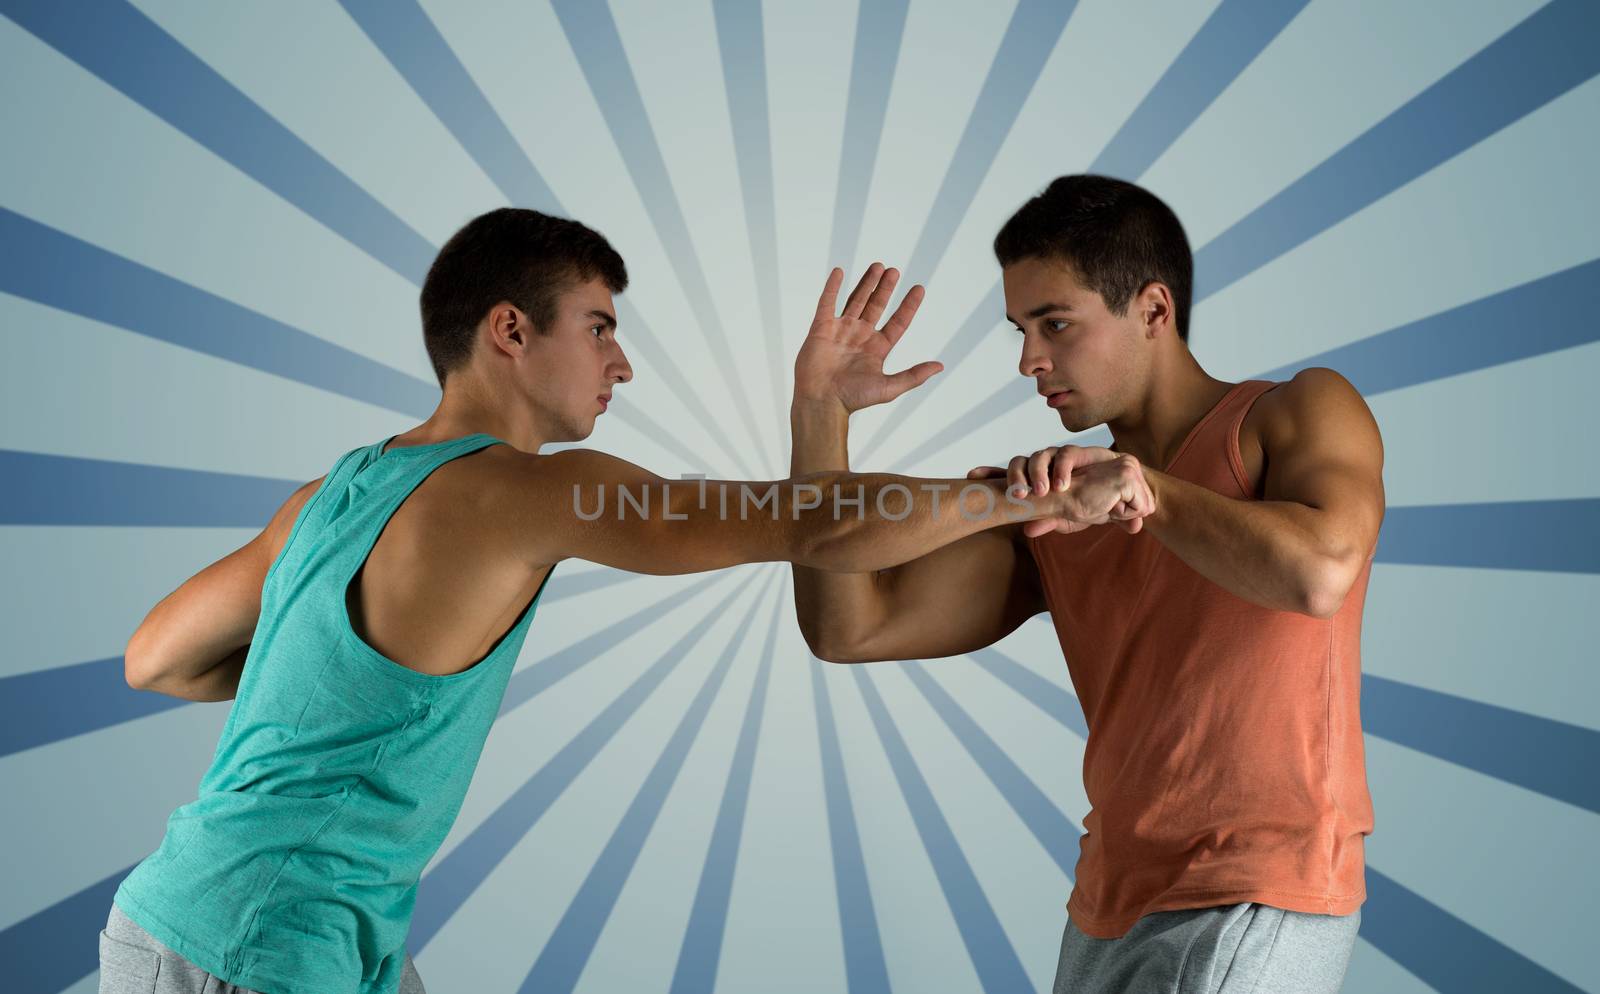 sport, competition, strength and people concept - young men fighting hand-to-hand over blue burst rays background